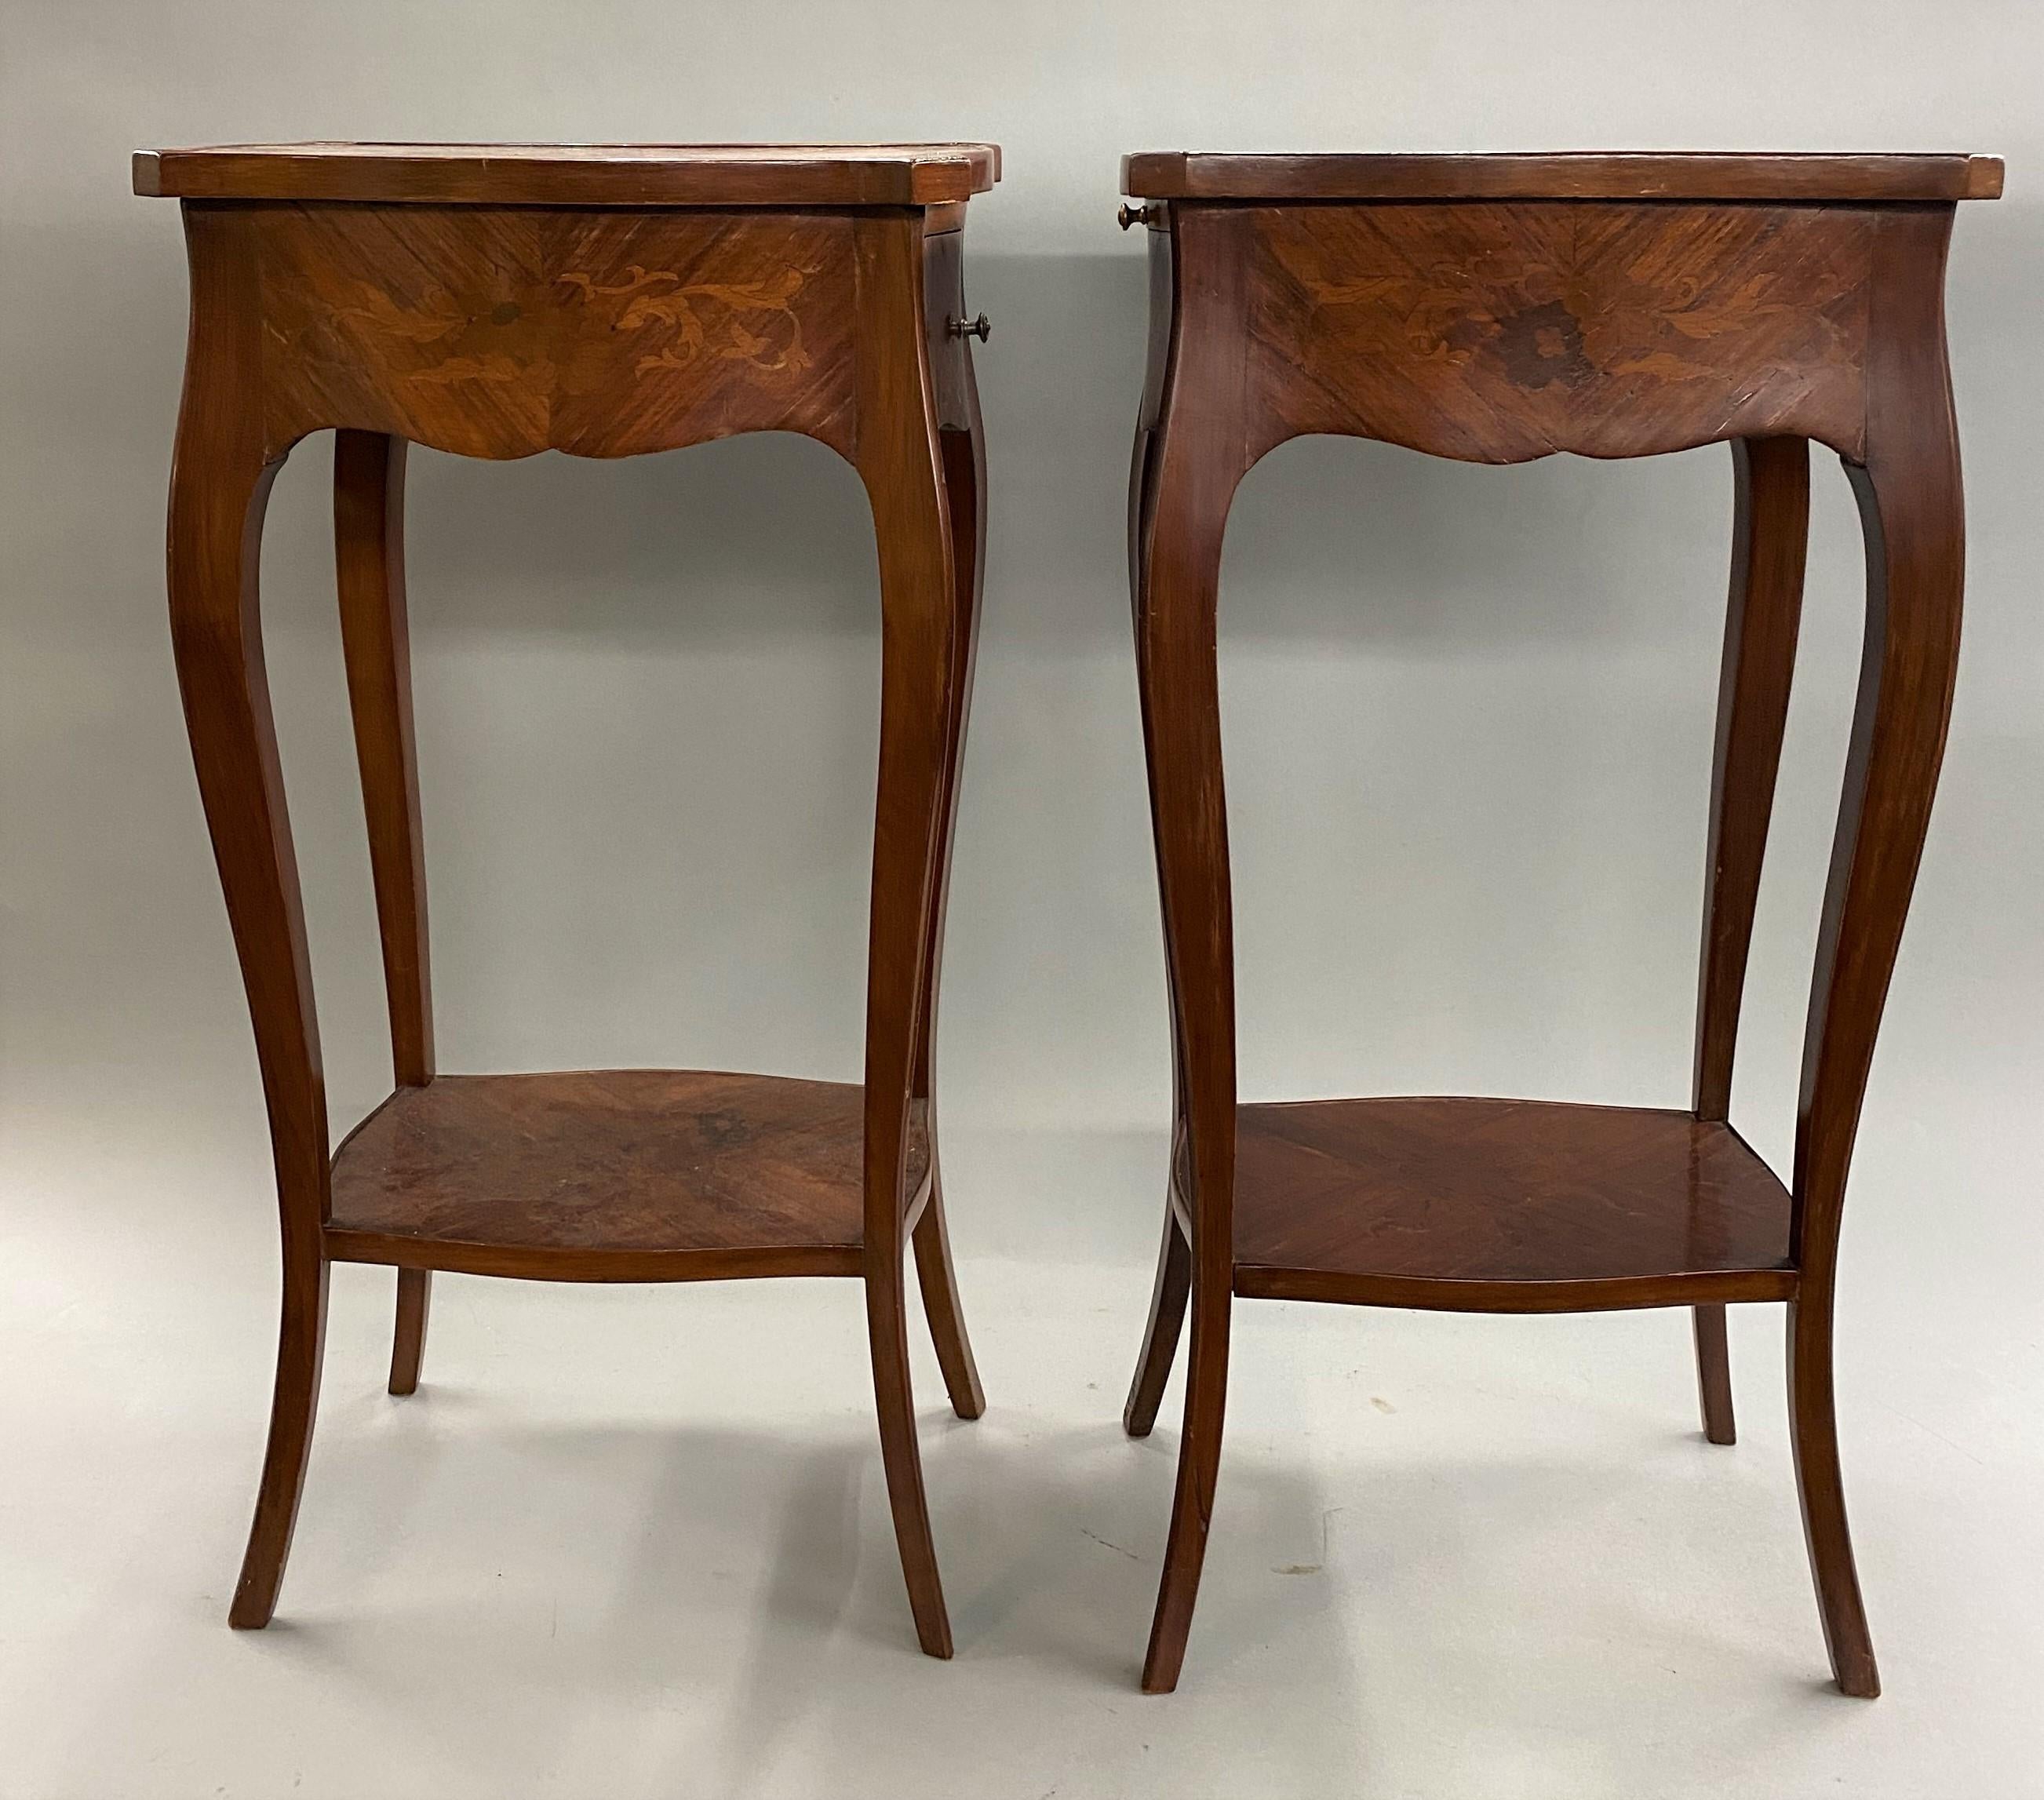 A fine pair of French rosewood end tables with foliate marquetry, each with a shaped top and single conforming drawer, as well as a candle slide on the back with gilt bordered tooled leather, supported by slender cabriole legs and a marquetry single